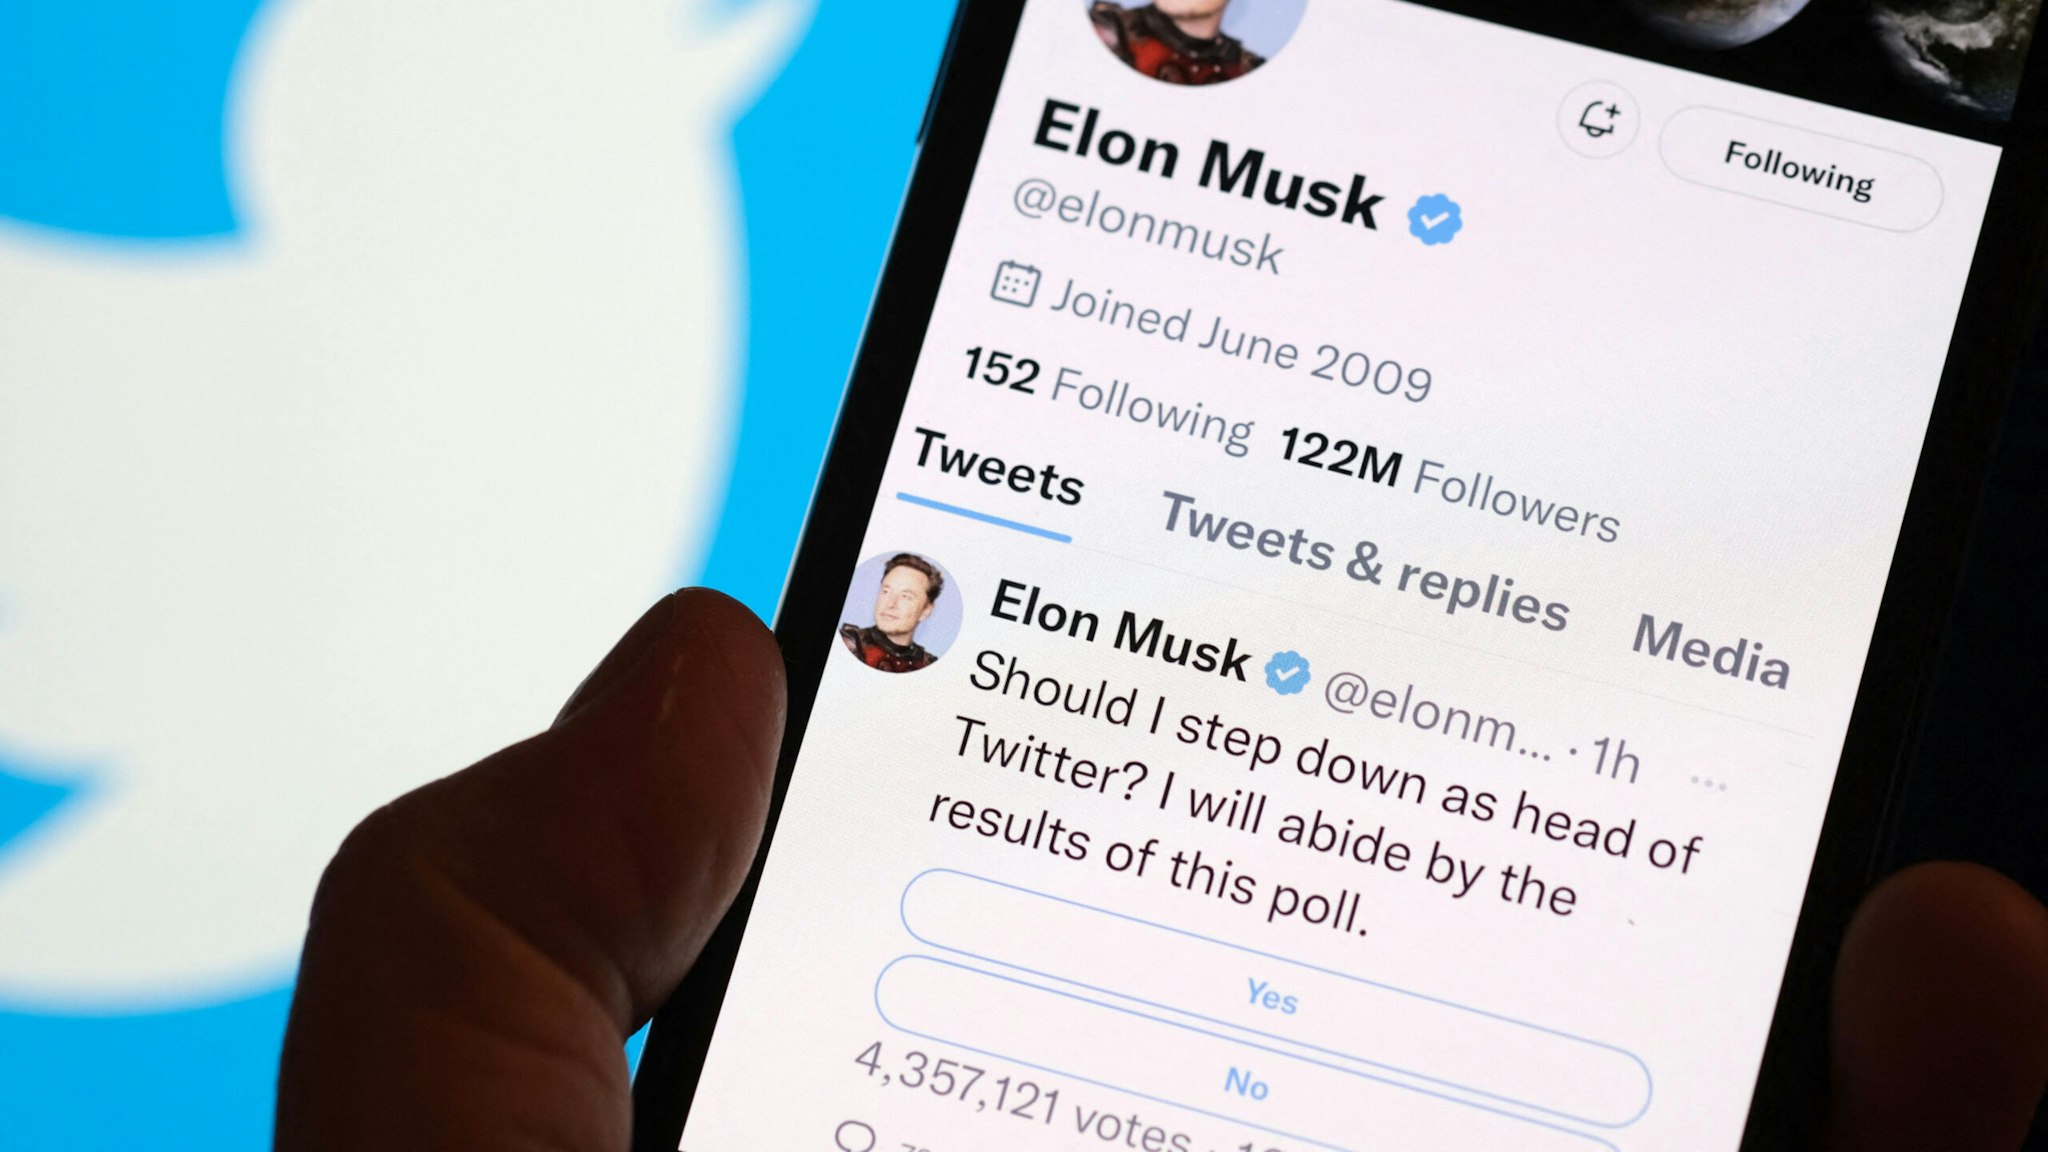 This photo illustration taken on December 18, 2022 in Los Angeles shows a phone displaying Elon Musk's Twitter page where he is conducting a survey about his future as the head of the company. - Twitter announced on December 18 it would no longer allow users to promote their accounts on several rival social media platforms including Facebook and Instagram, but the site's mercurial owner Elon Musk appeared to backtrack on the new policy just hours later.